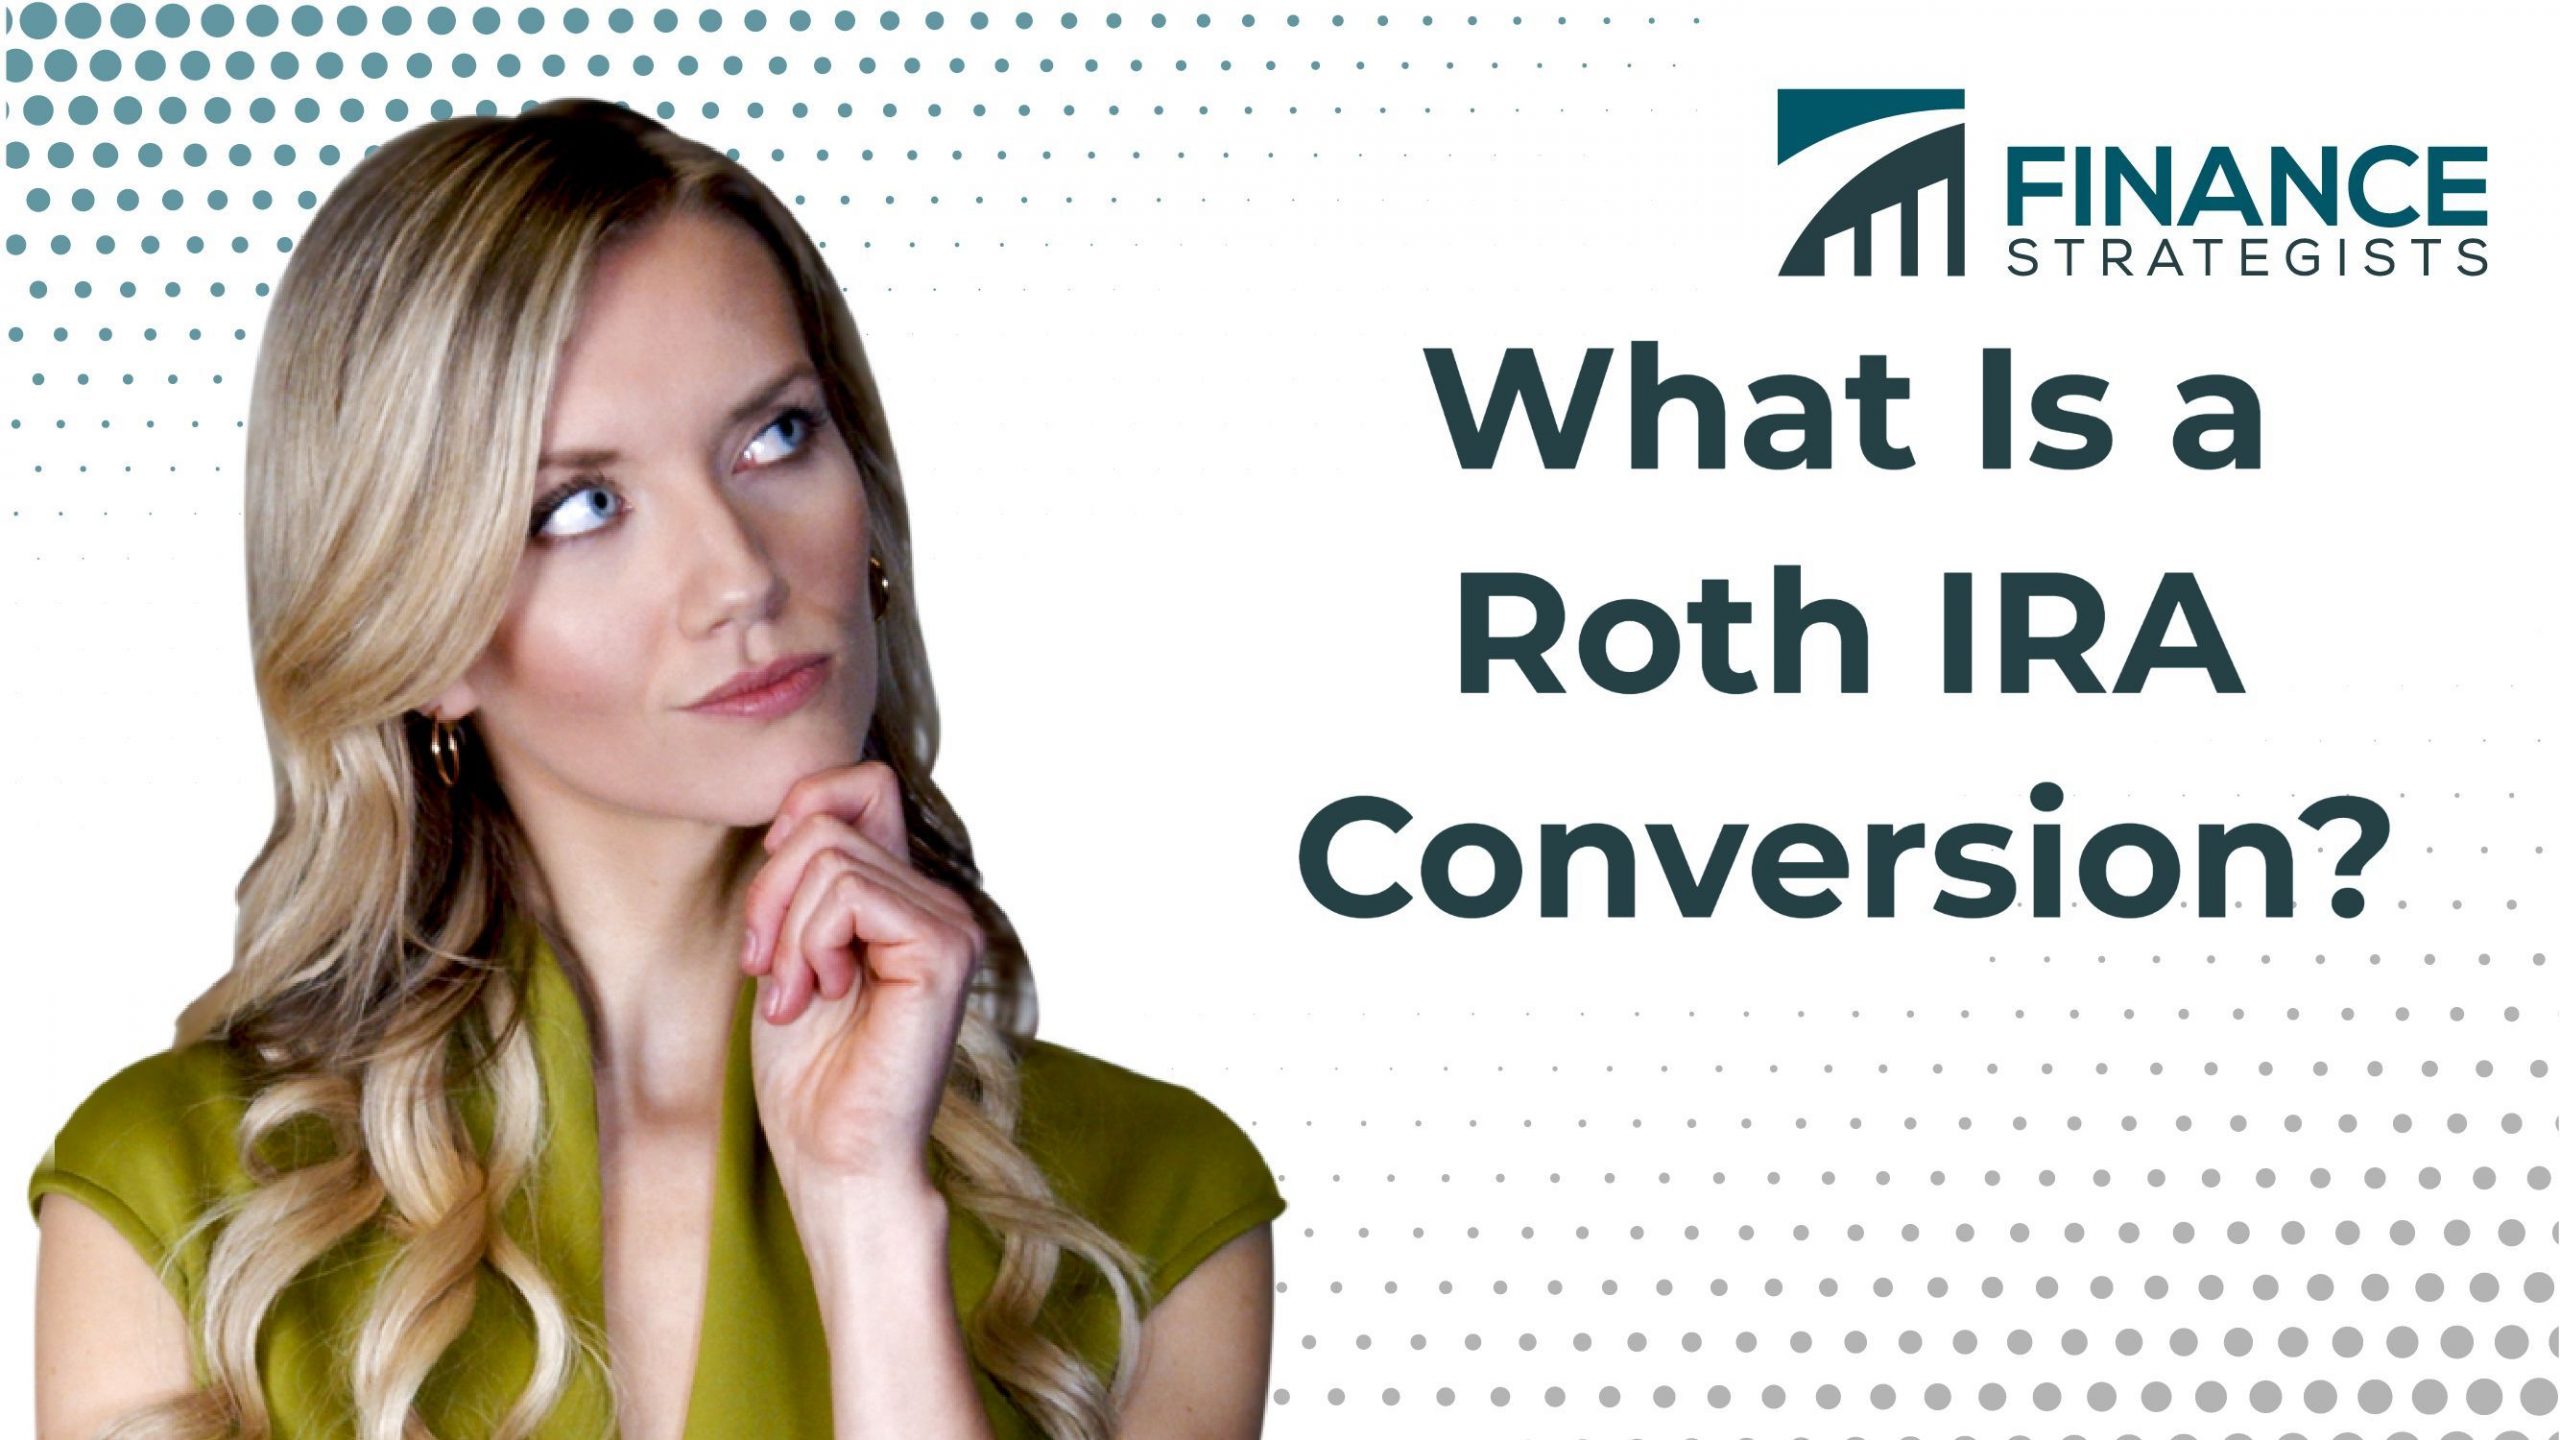 Roth IRA Conversion Definition Finance Strategists